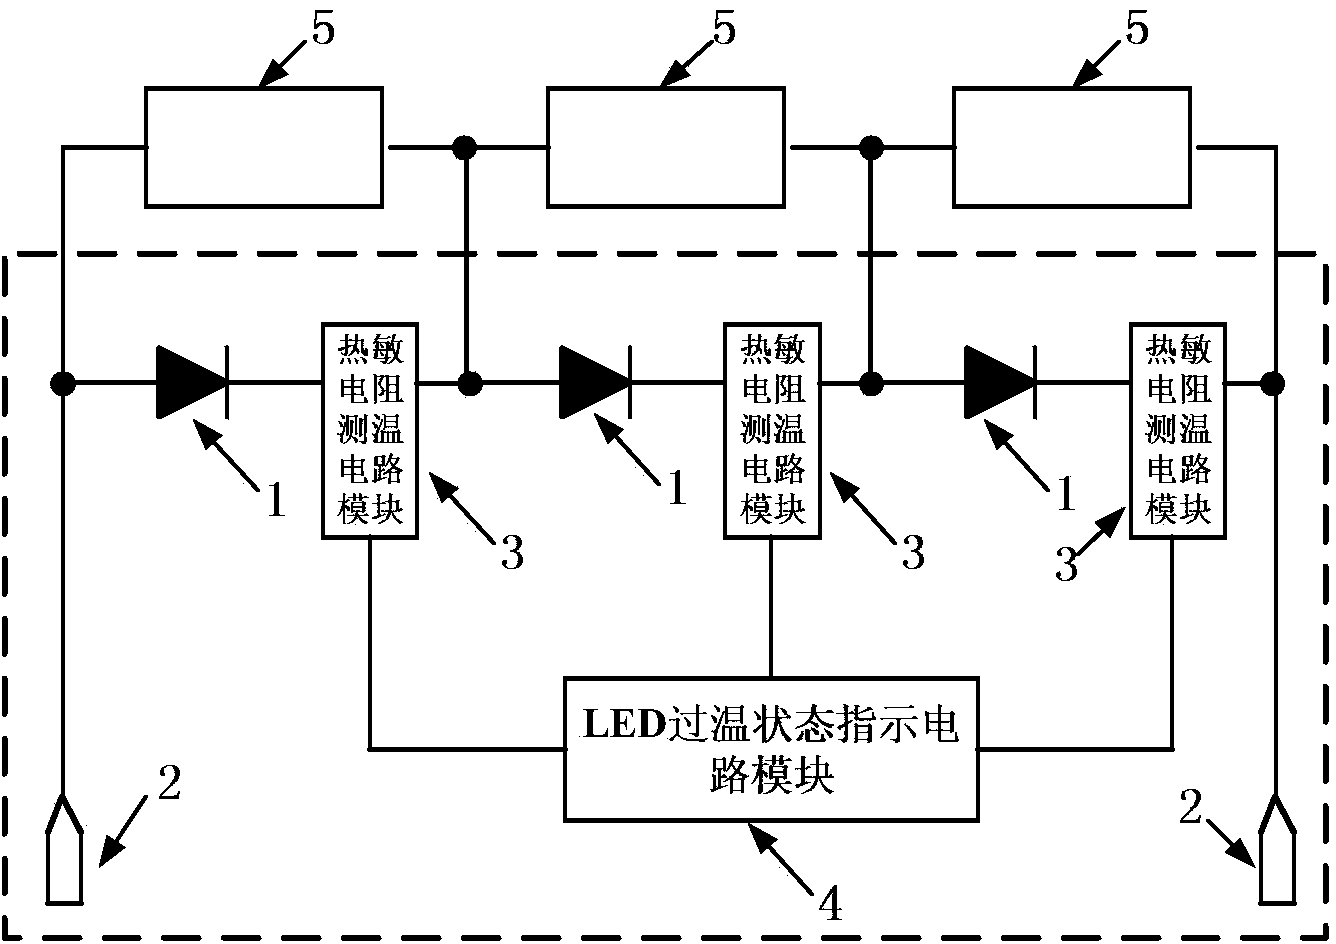 Over-temperature state indication type photovoltaic junction box based on thermistor temperature measurement